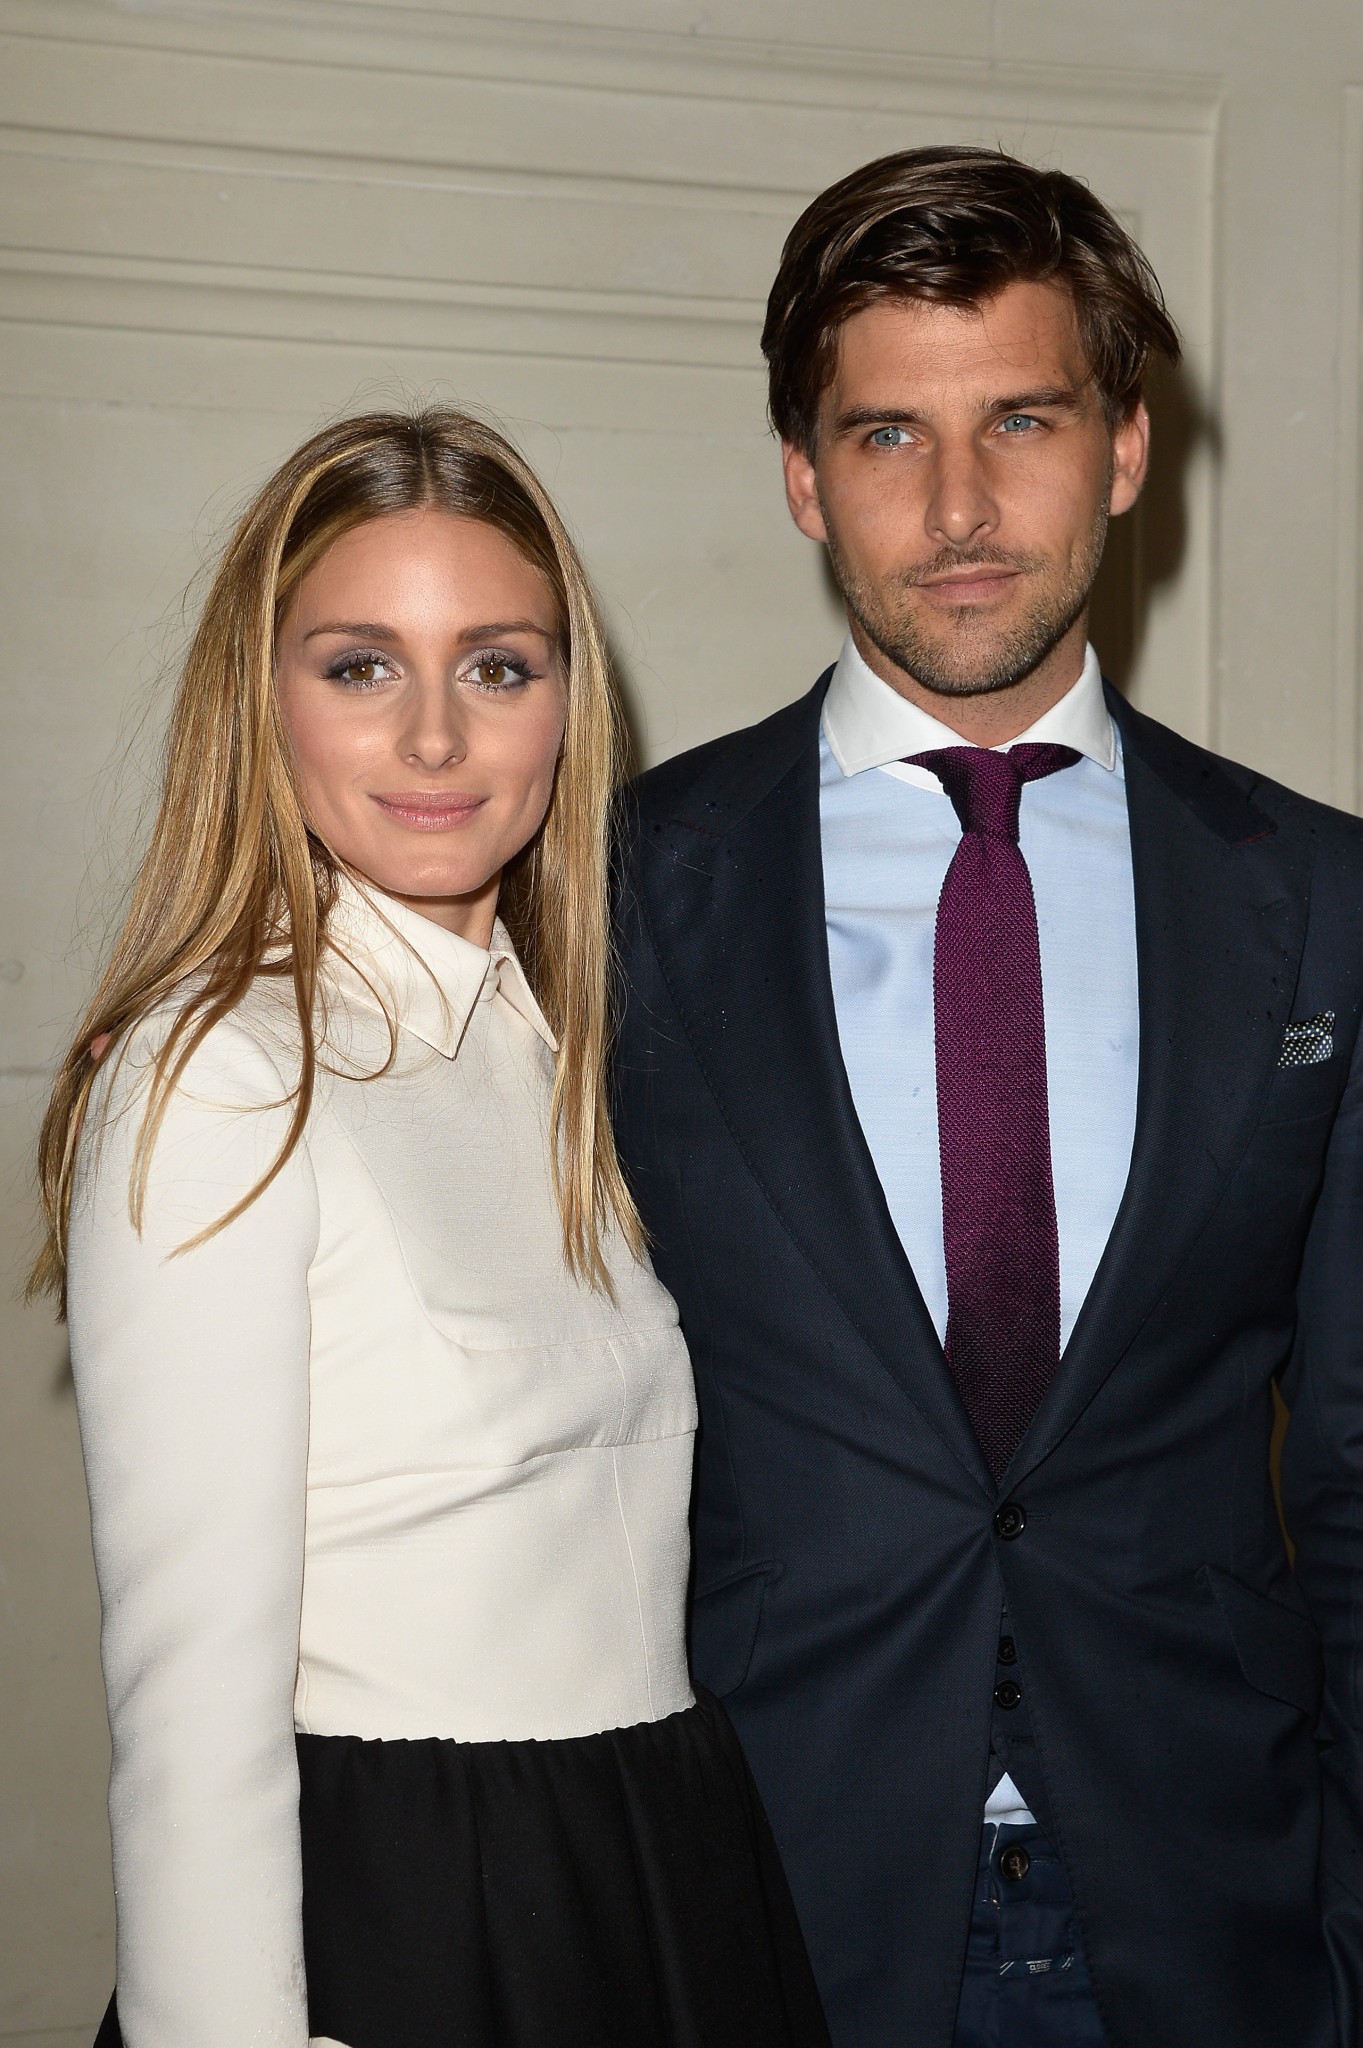 PARIS, FRANCE - JULY 09: (L-R) Olivia Palermo and Johannes Huebl attend the Valentino show as part of Paris Fashion Week - Haute Couture Fall/Winter 2014-2015 at Hotel Salomon de Rothschild on July 9, 2014 in Paris, France. (Photo by Pascal Le Segretain/Getty Images)